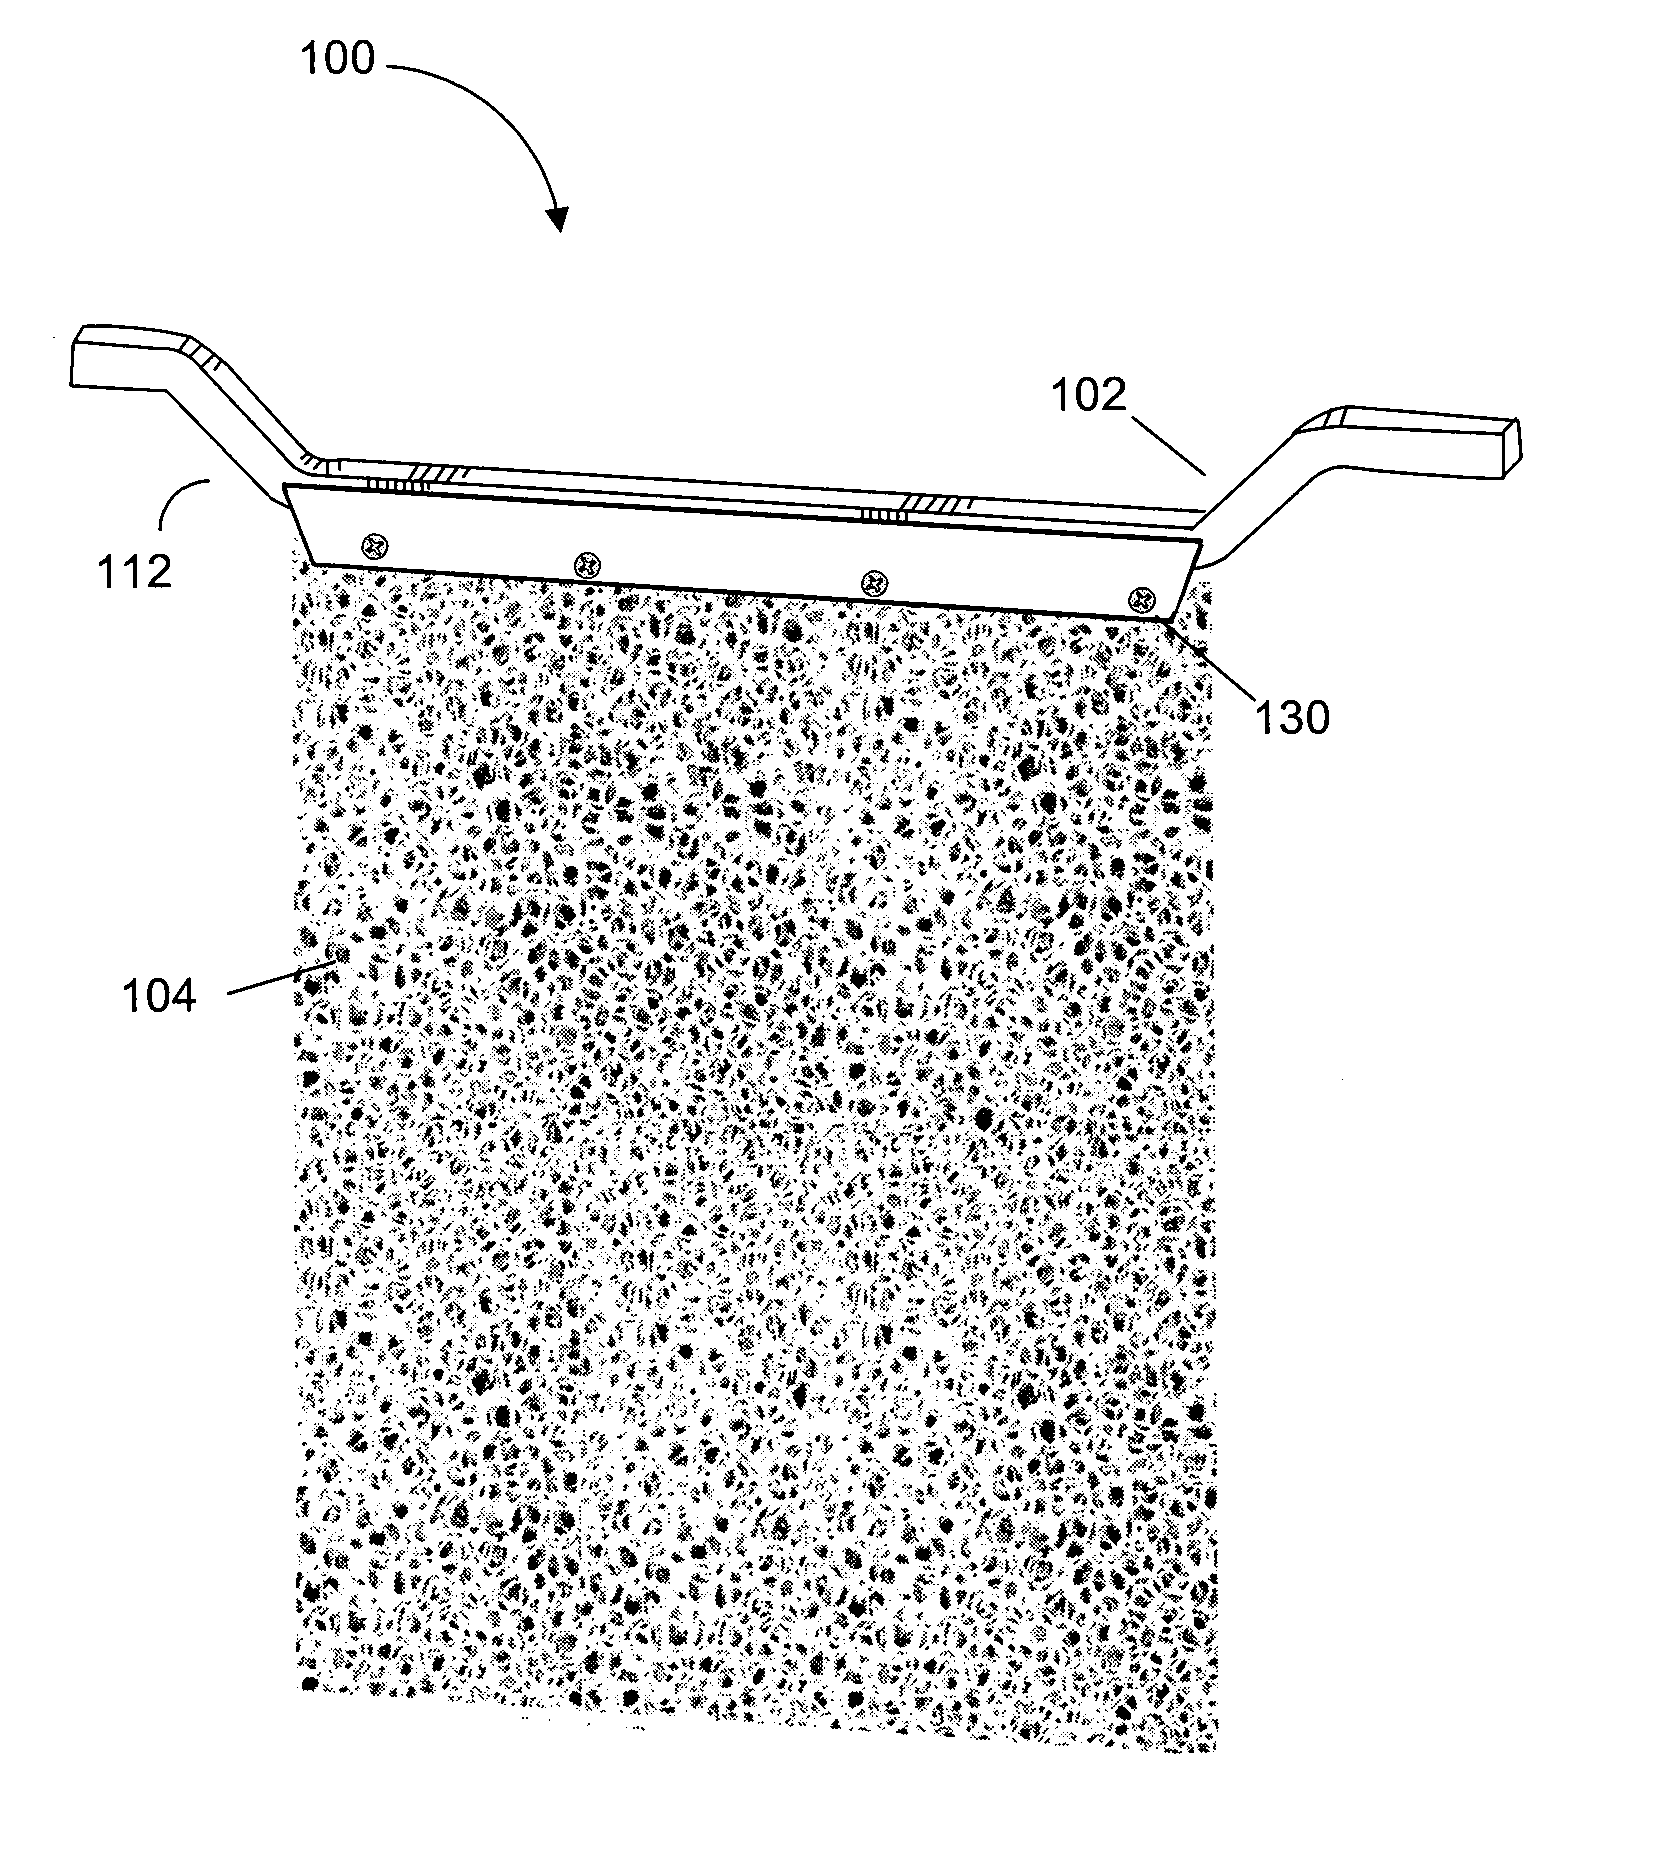 High surface area cathode assembly, system including the assembly, and method of using same